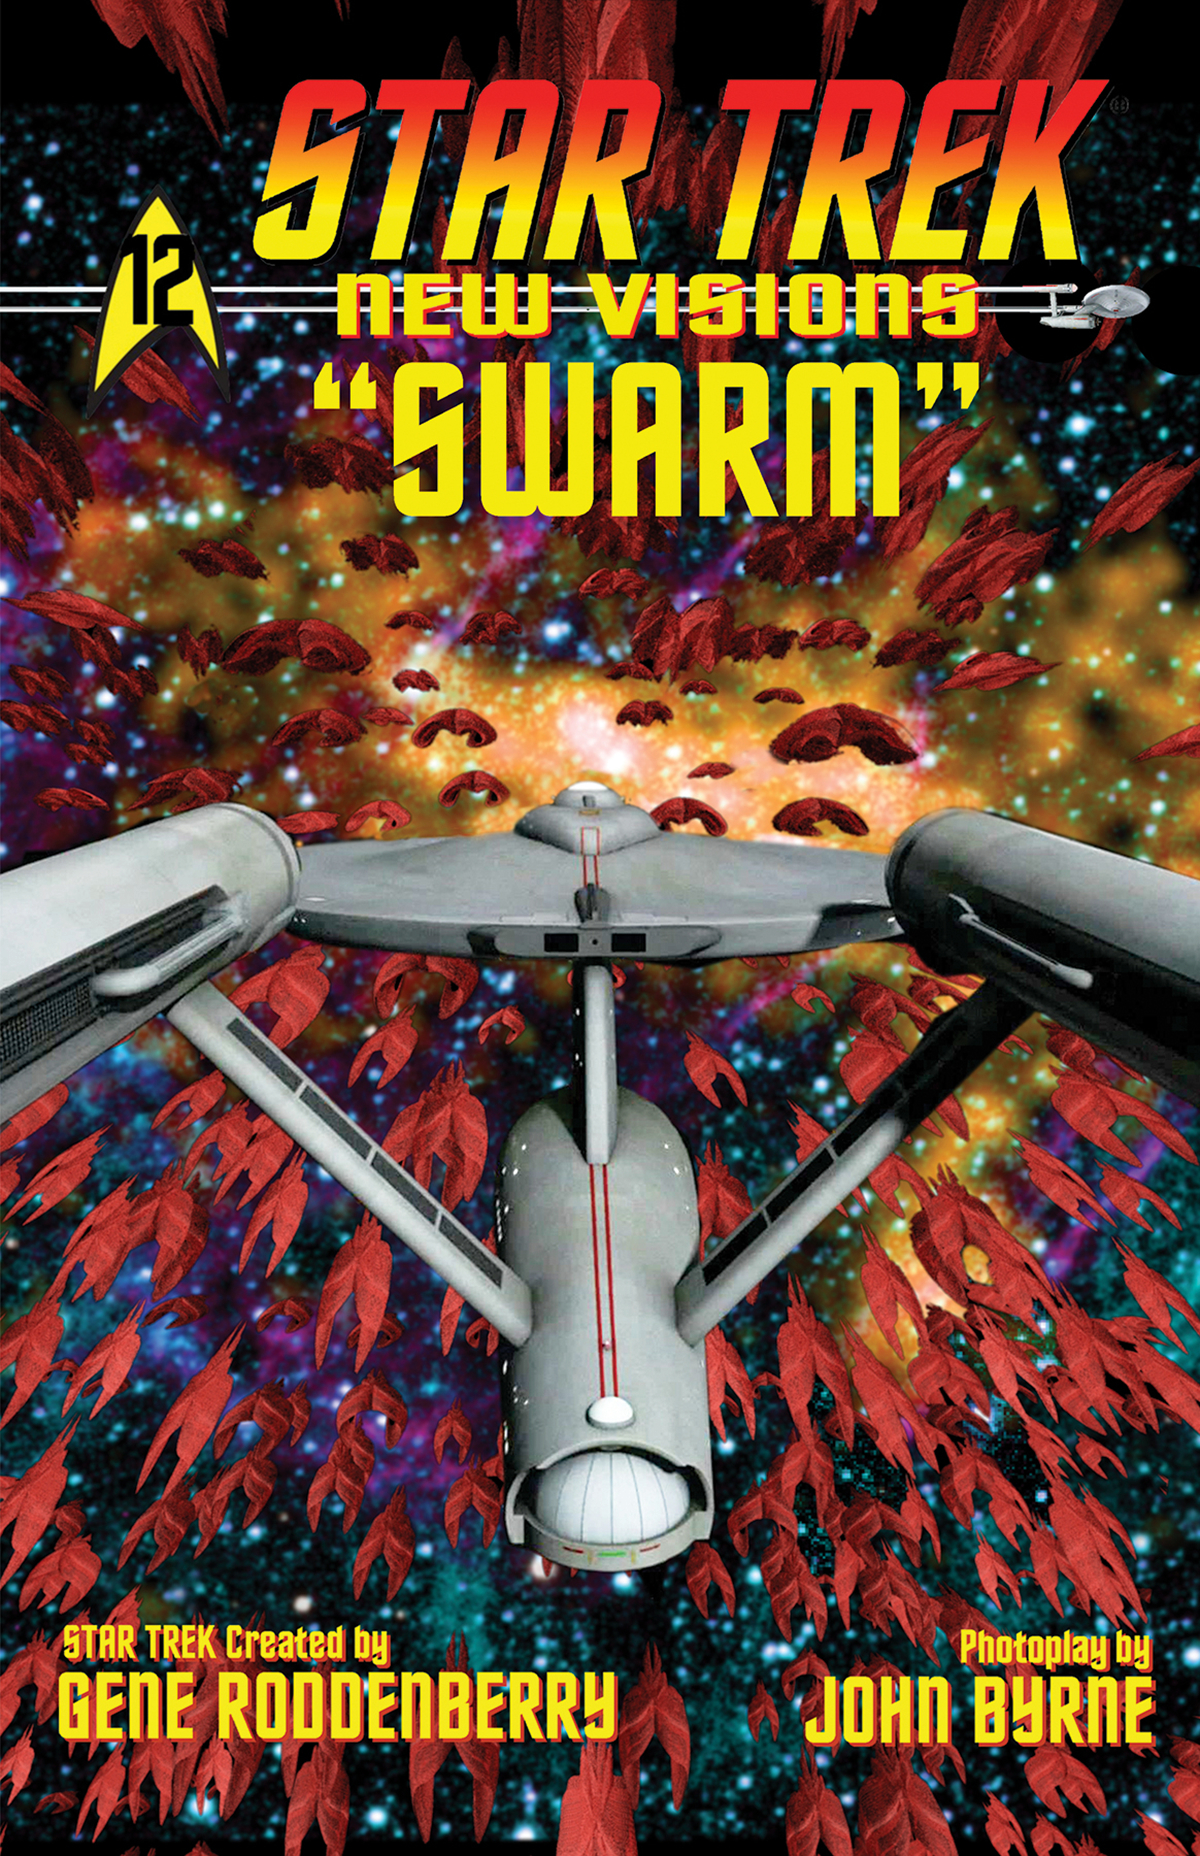 STAR TREK NEW VISIONS SPECIAL SWARM (ONE SHOT)